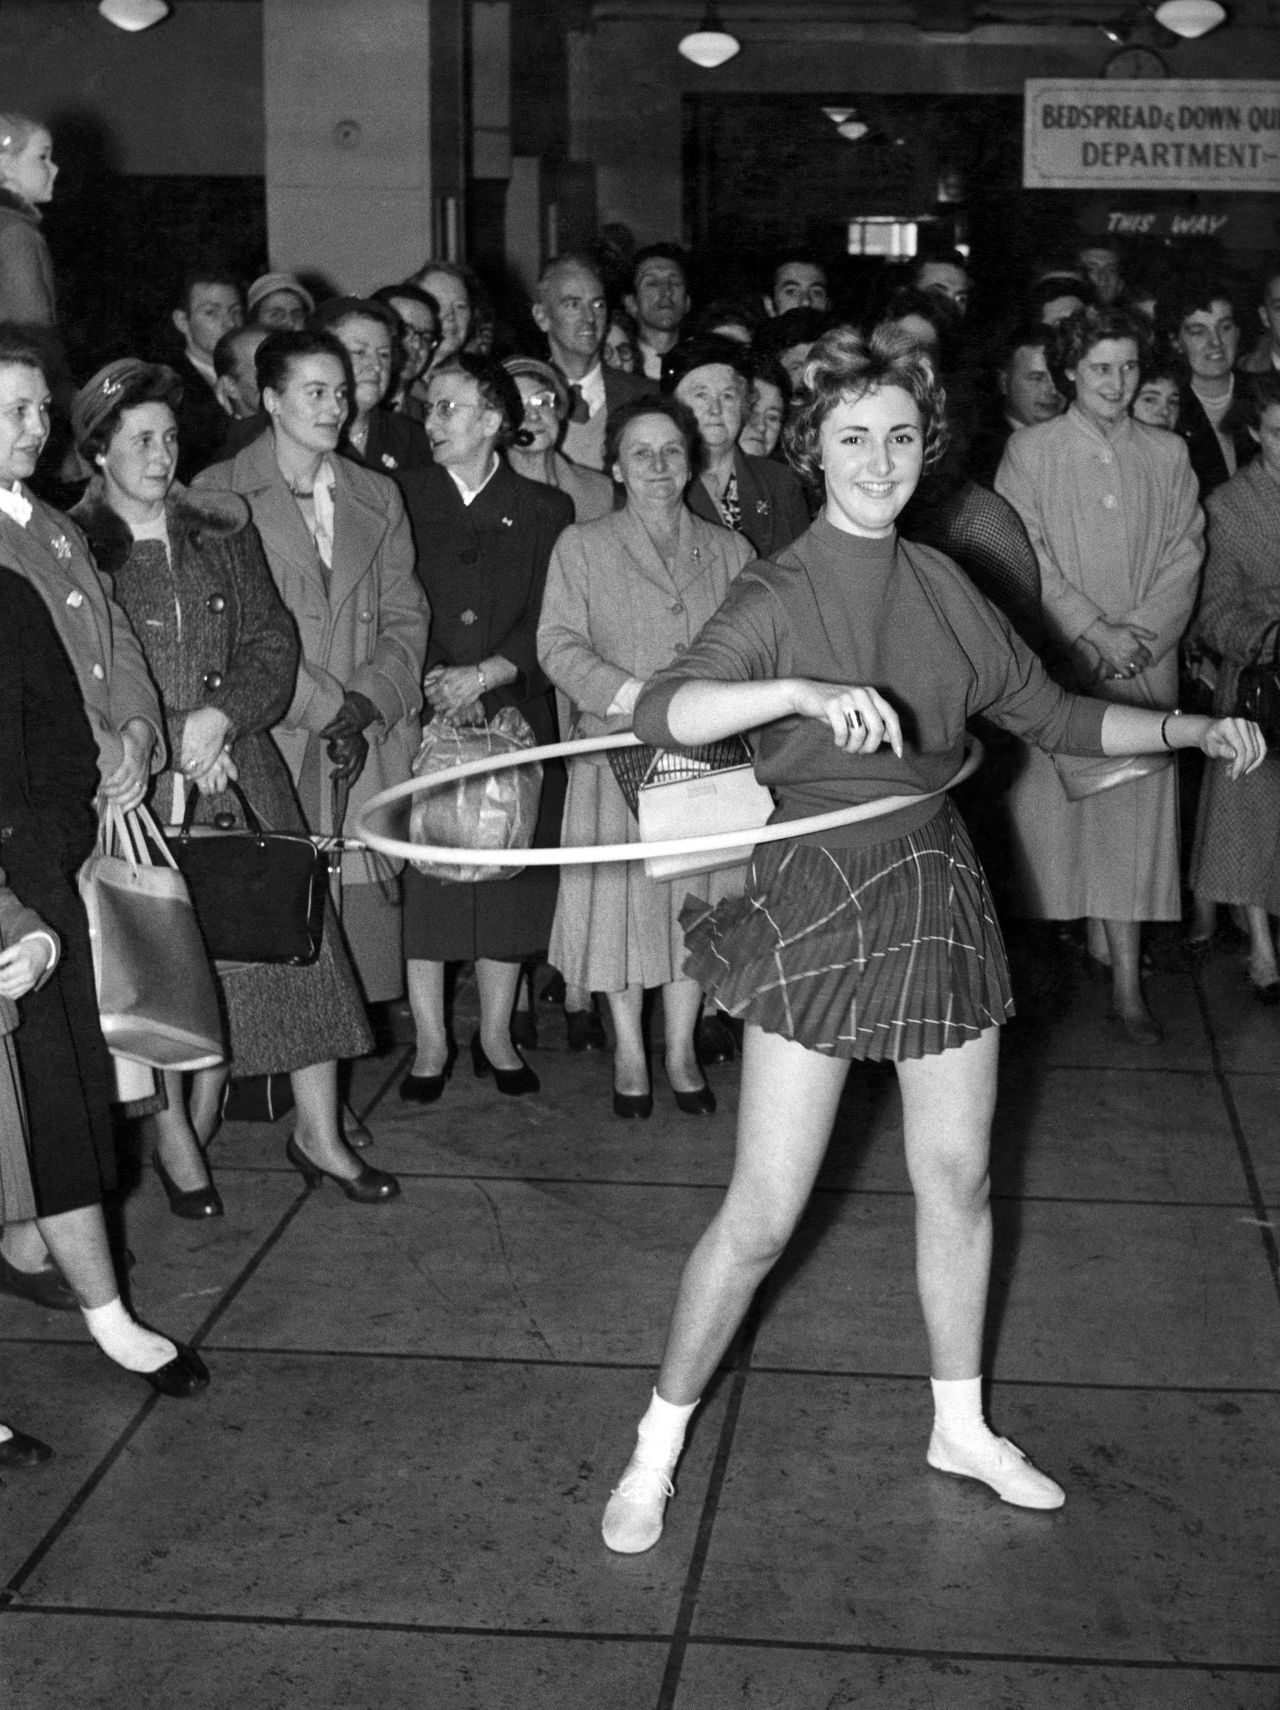 Hooping in Manchester circa 1959.